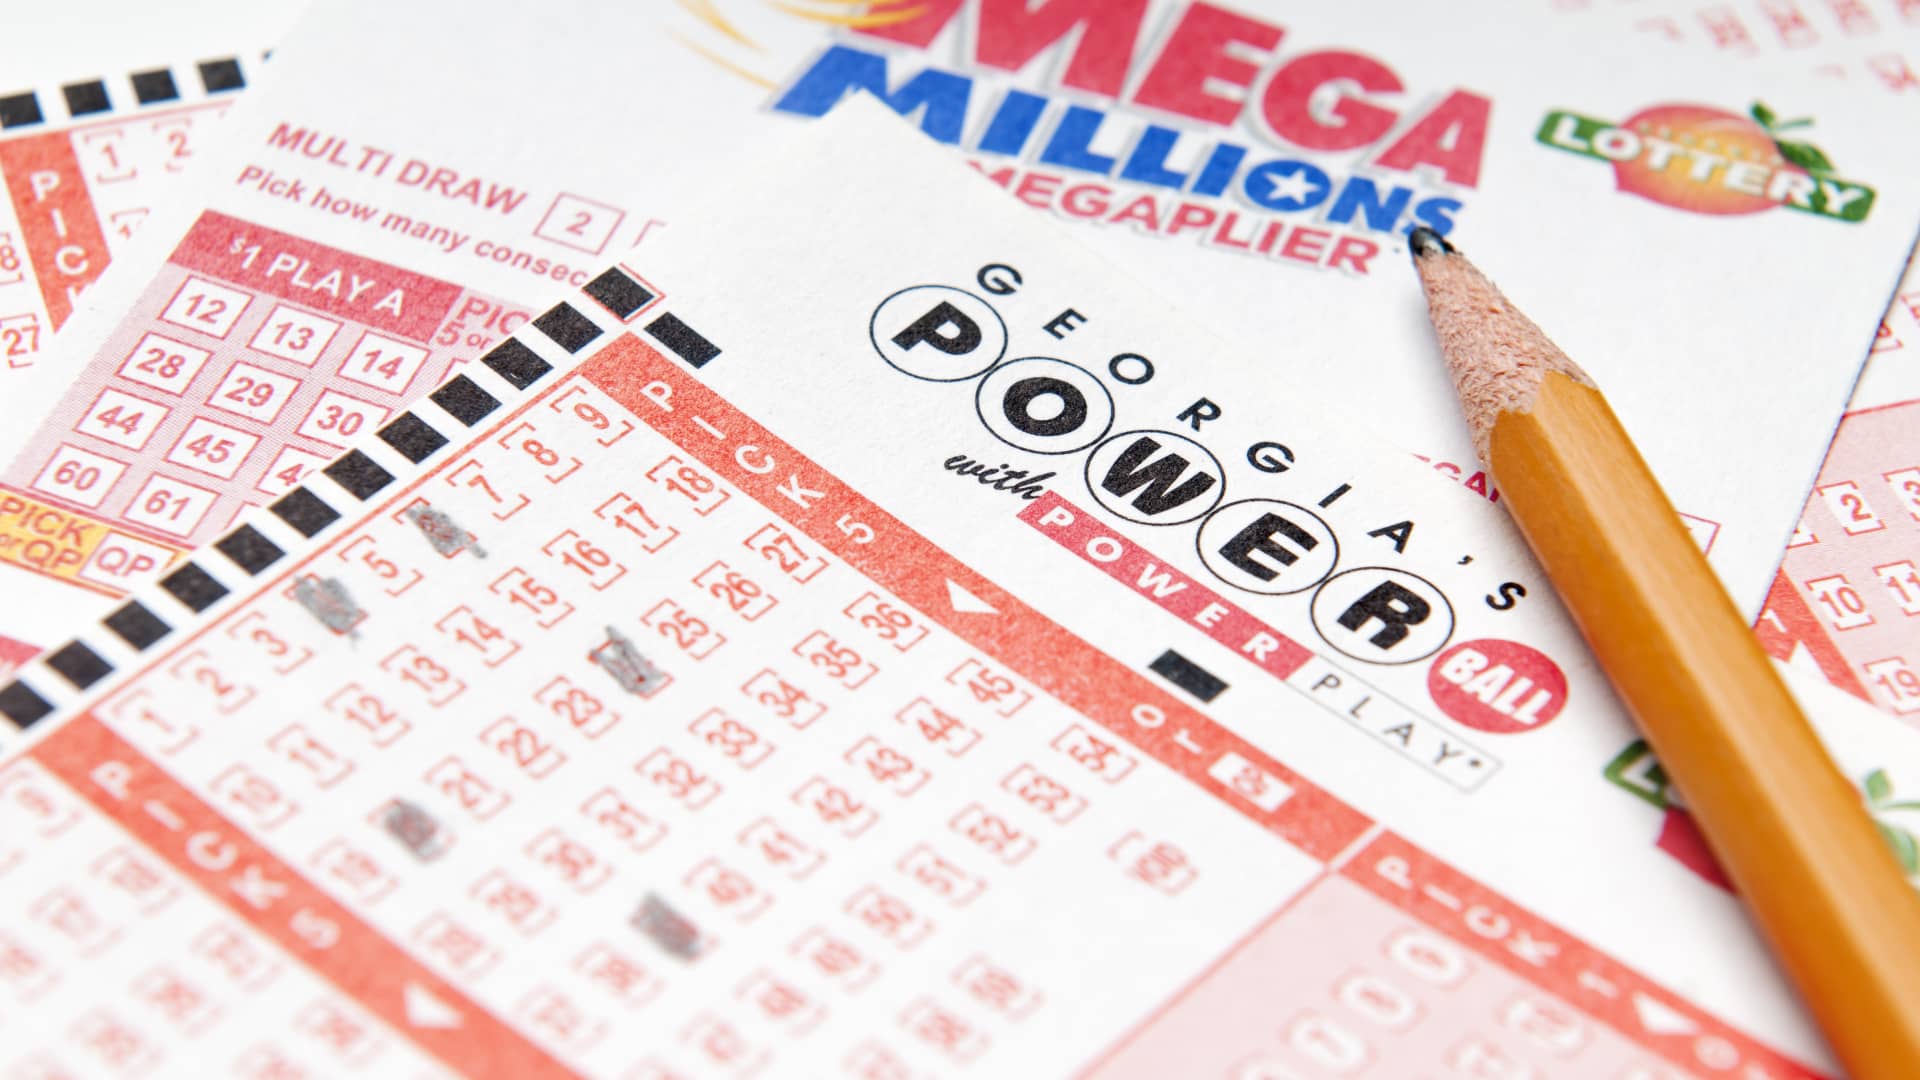 Powerball and Mega Millions jackpots are both above $400 million